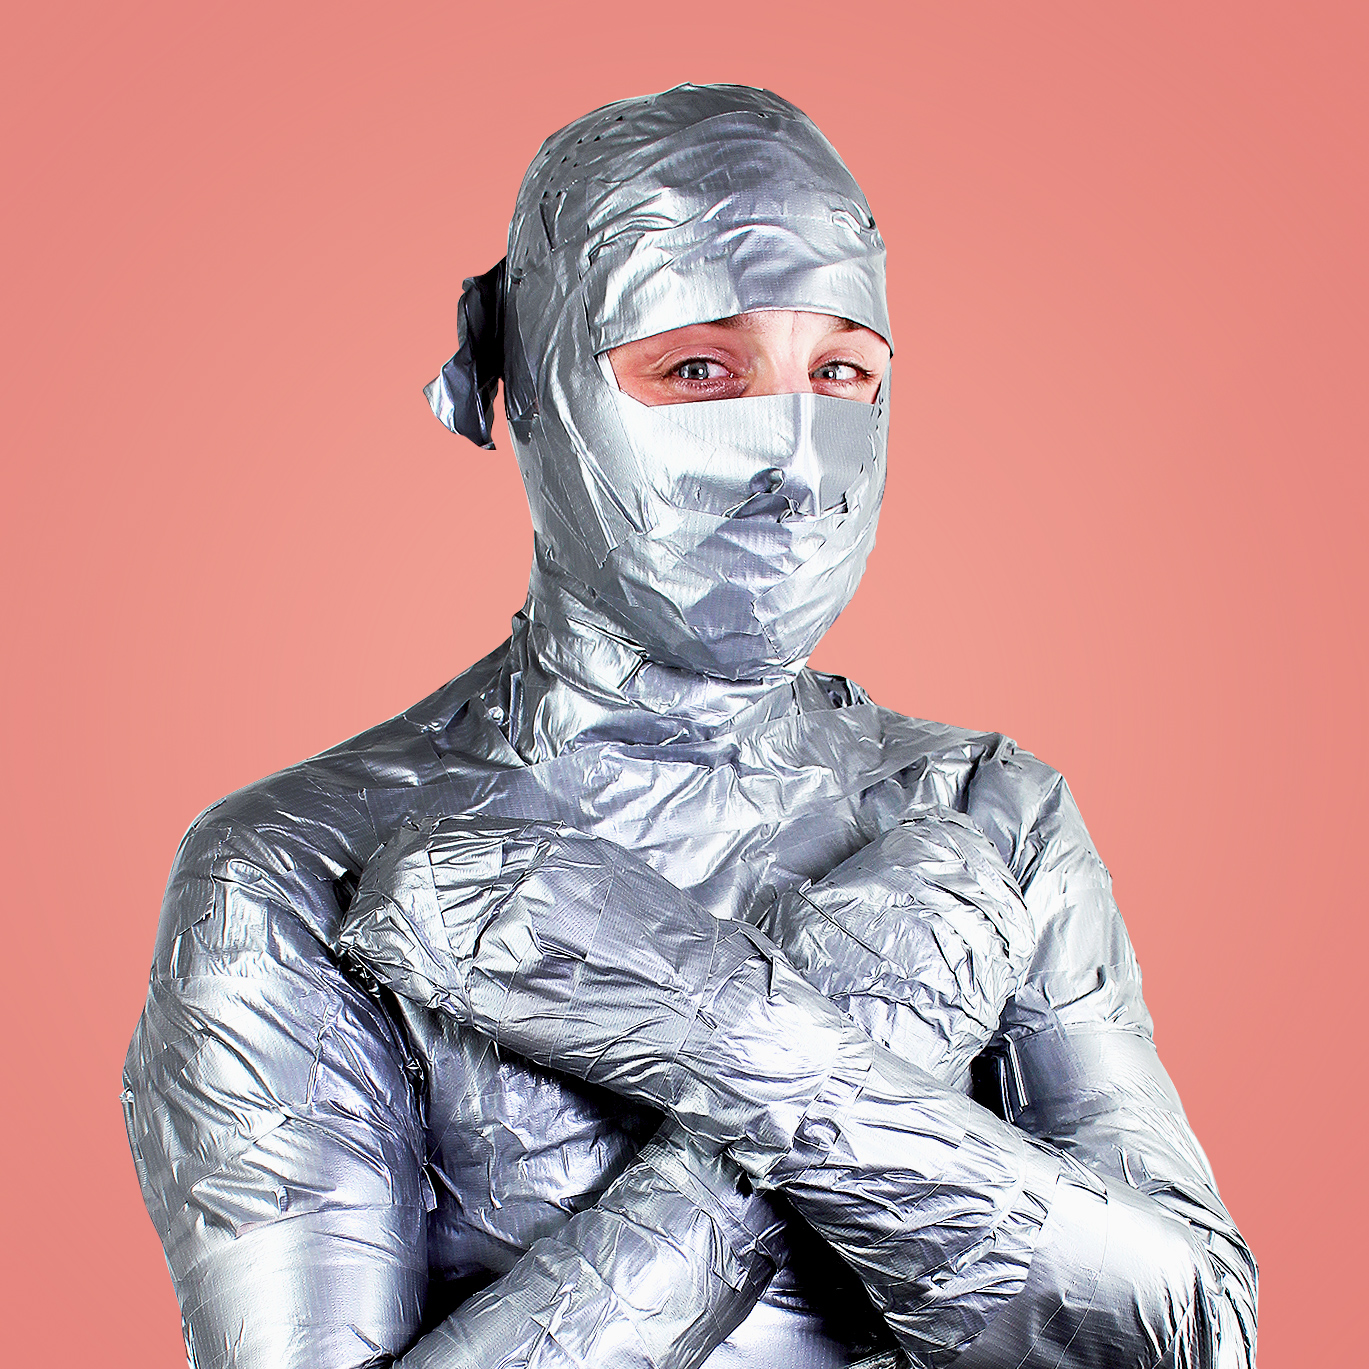 duct tape or mummy? 